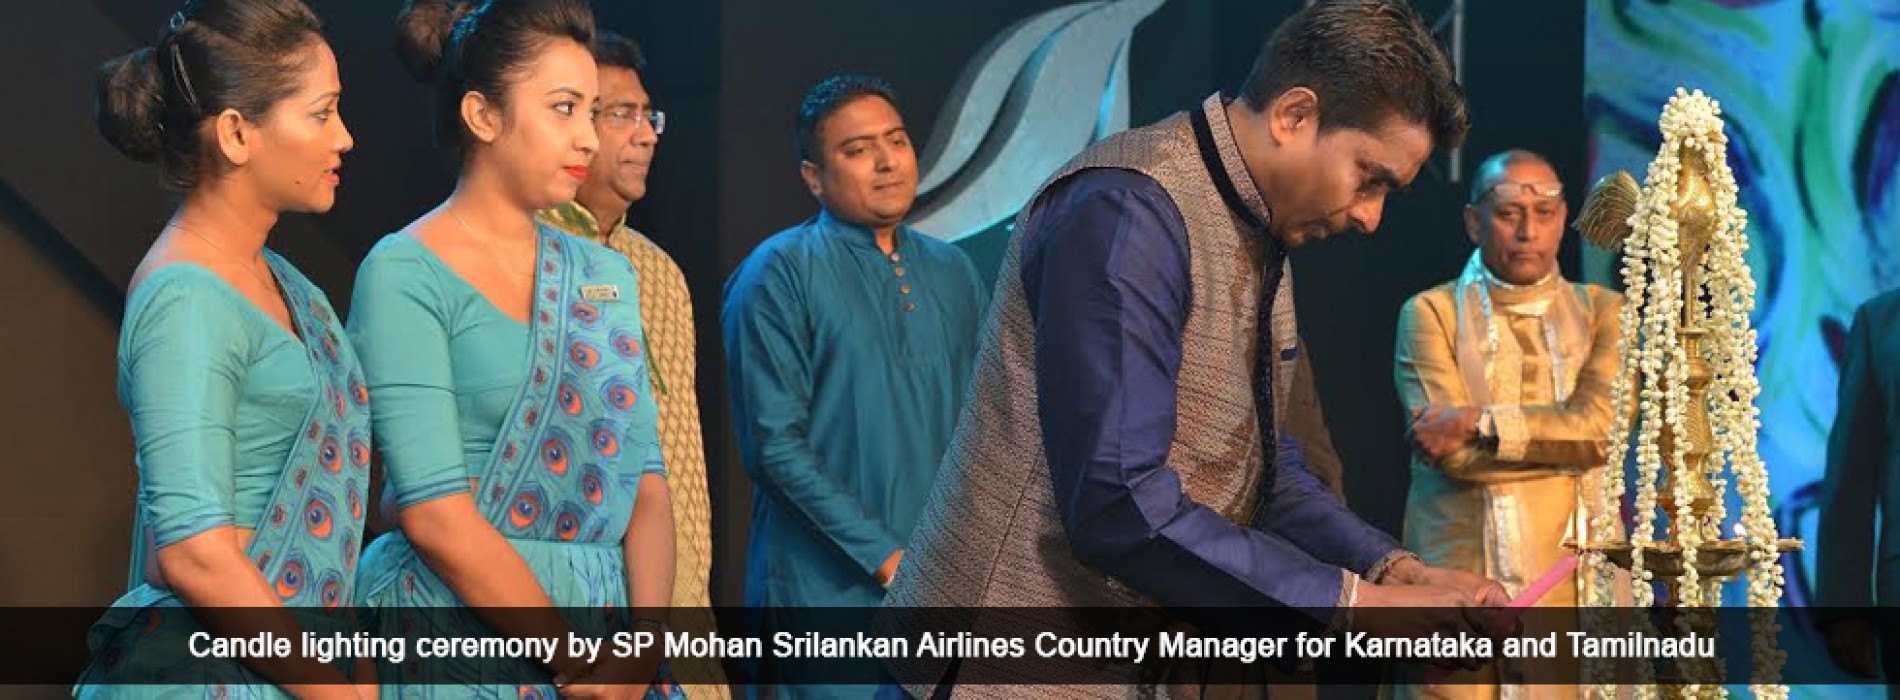 SriLankan Airlines hosted Agents & Cargo Awards Night in Chennai and New Delhi, March 2017